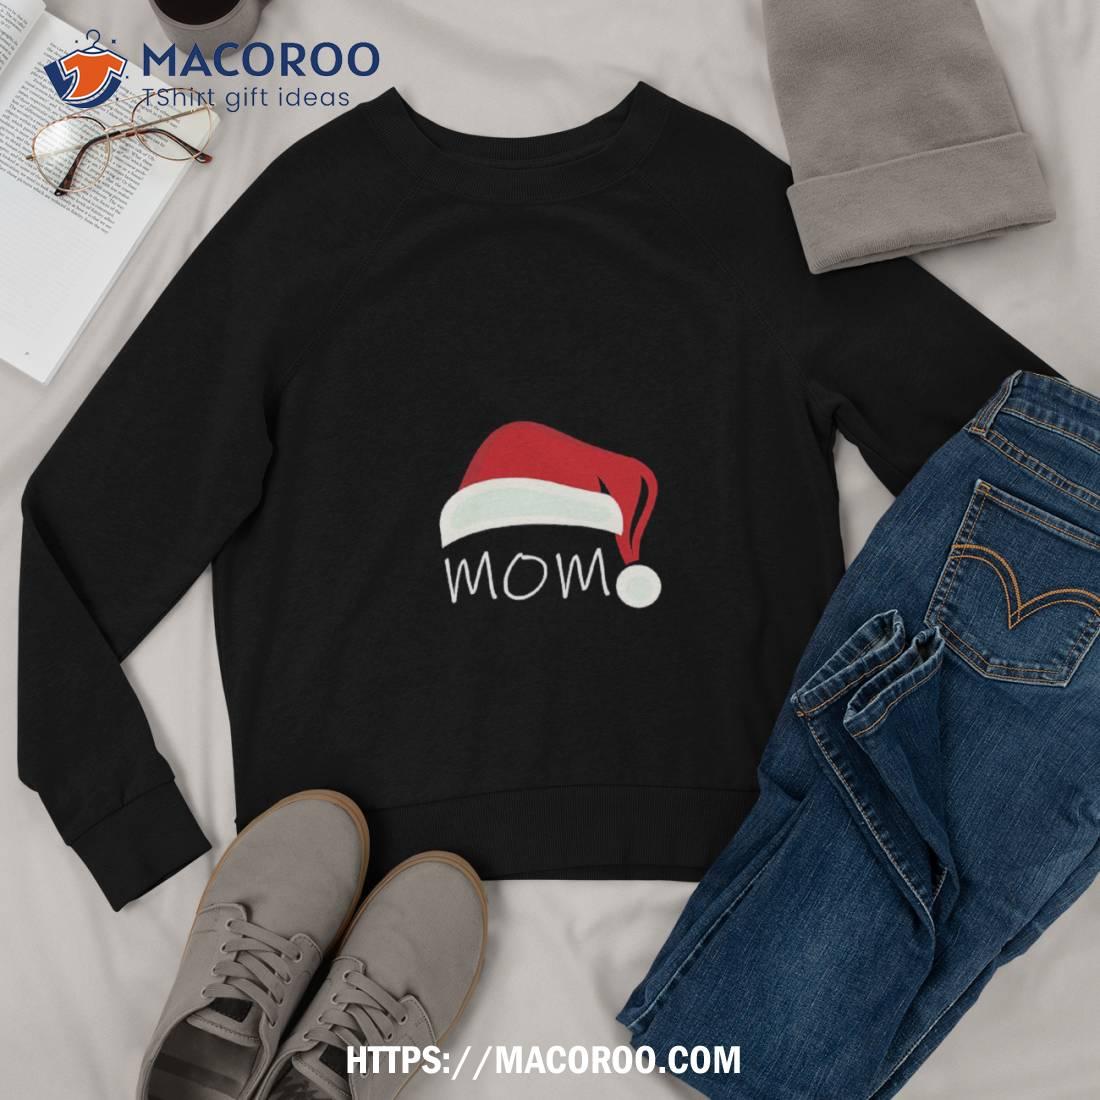 The Most Wonderful Mom, Mom Gift Shirt, Christmas Gifts For My Mom